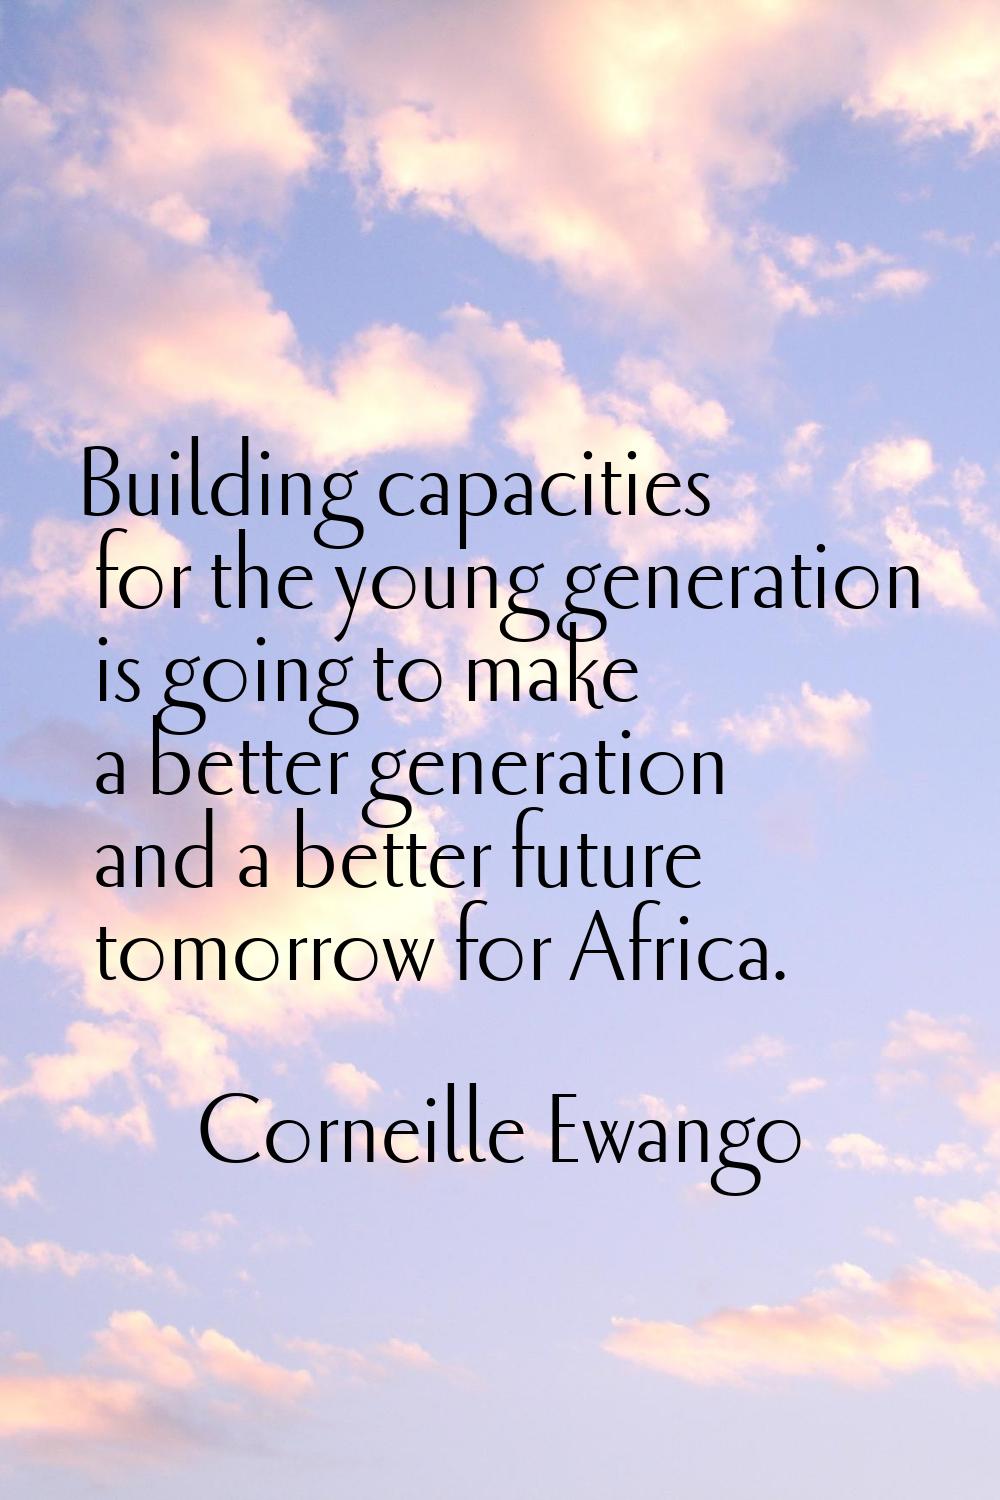 Building capacities for the young generation is going to make a better generation and a better futu